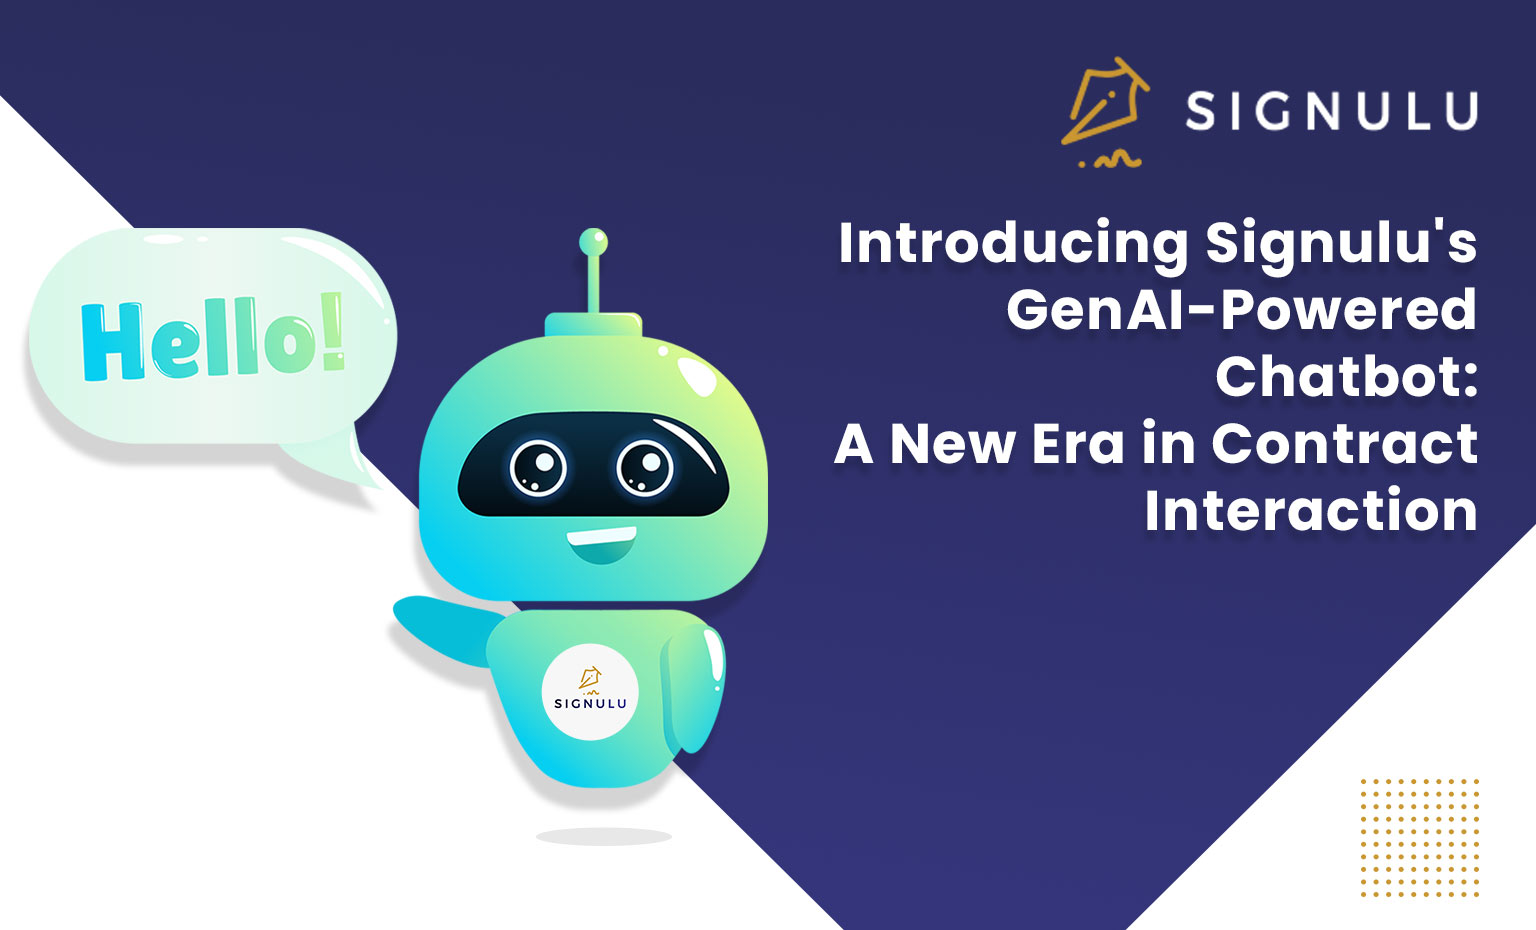 Introducing Signulu’s GenAI-Powered Chatbot: A New Era in Contract Interaction